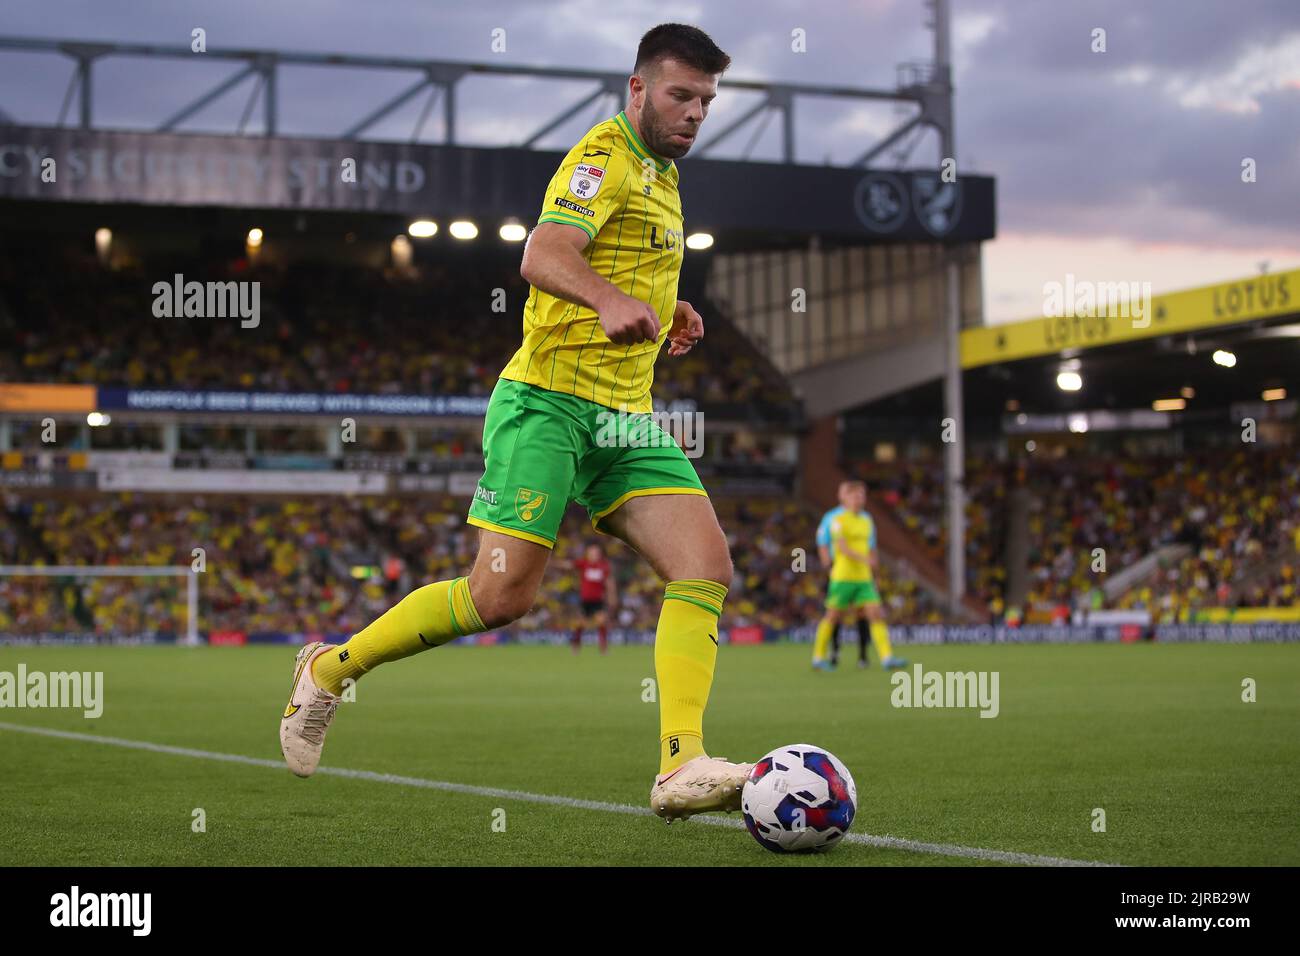 Grant Hanley of Norwich City - Norwich City v Millwall, Sky Bet Championship, Carrow Road, Norwich, UK - 19th August 2022  Editorial Use Only - DataCo restrictions apply Stock Photo